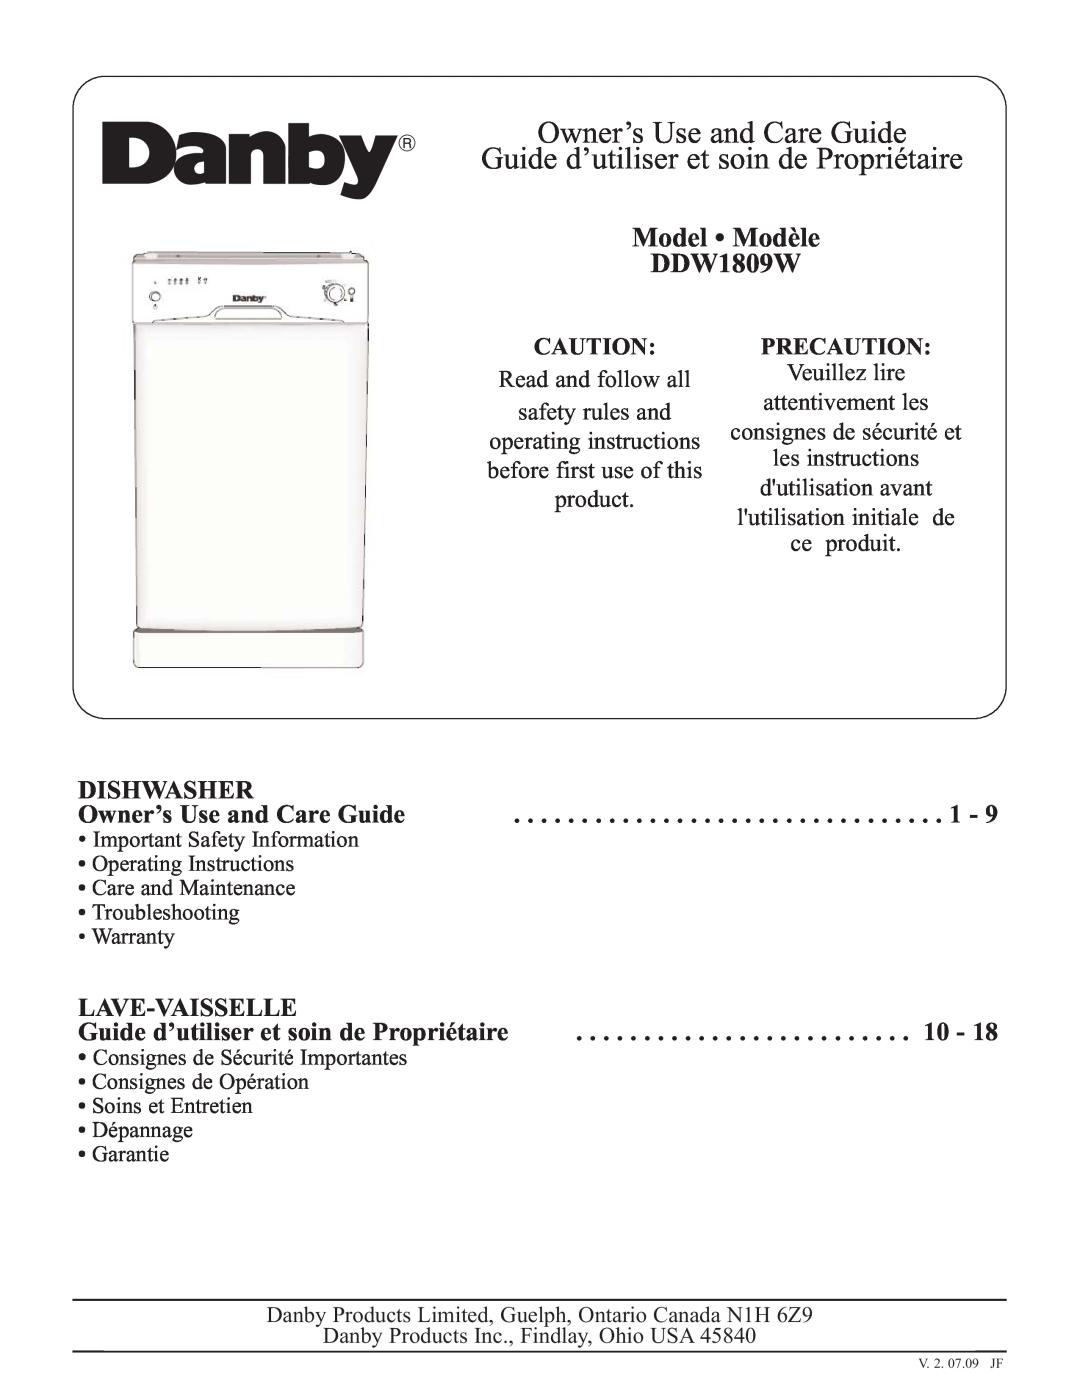 Danby DDW1809W operating instructions Dishwasher, Owner’s Use and Care Guide, Lave-Vaisselle, Precaution 